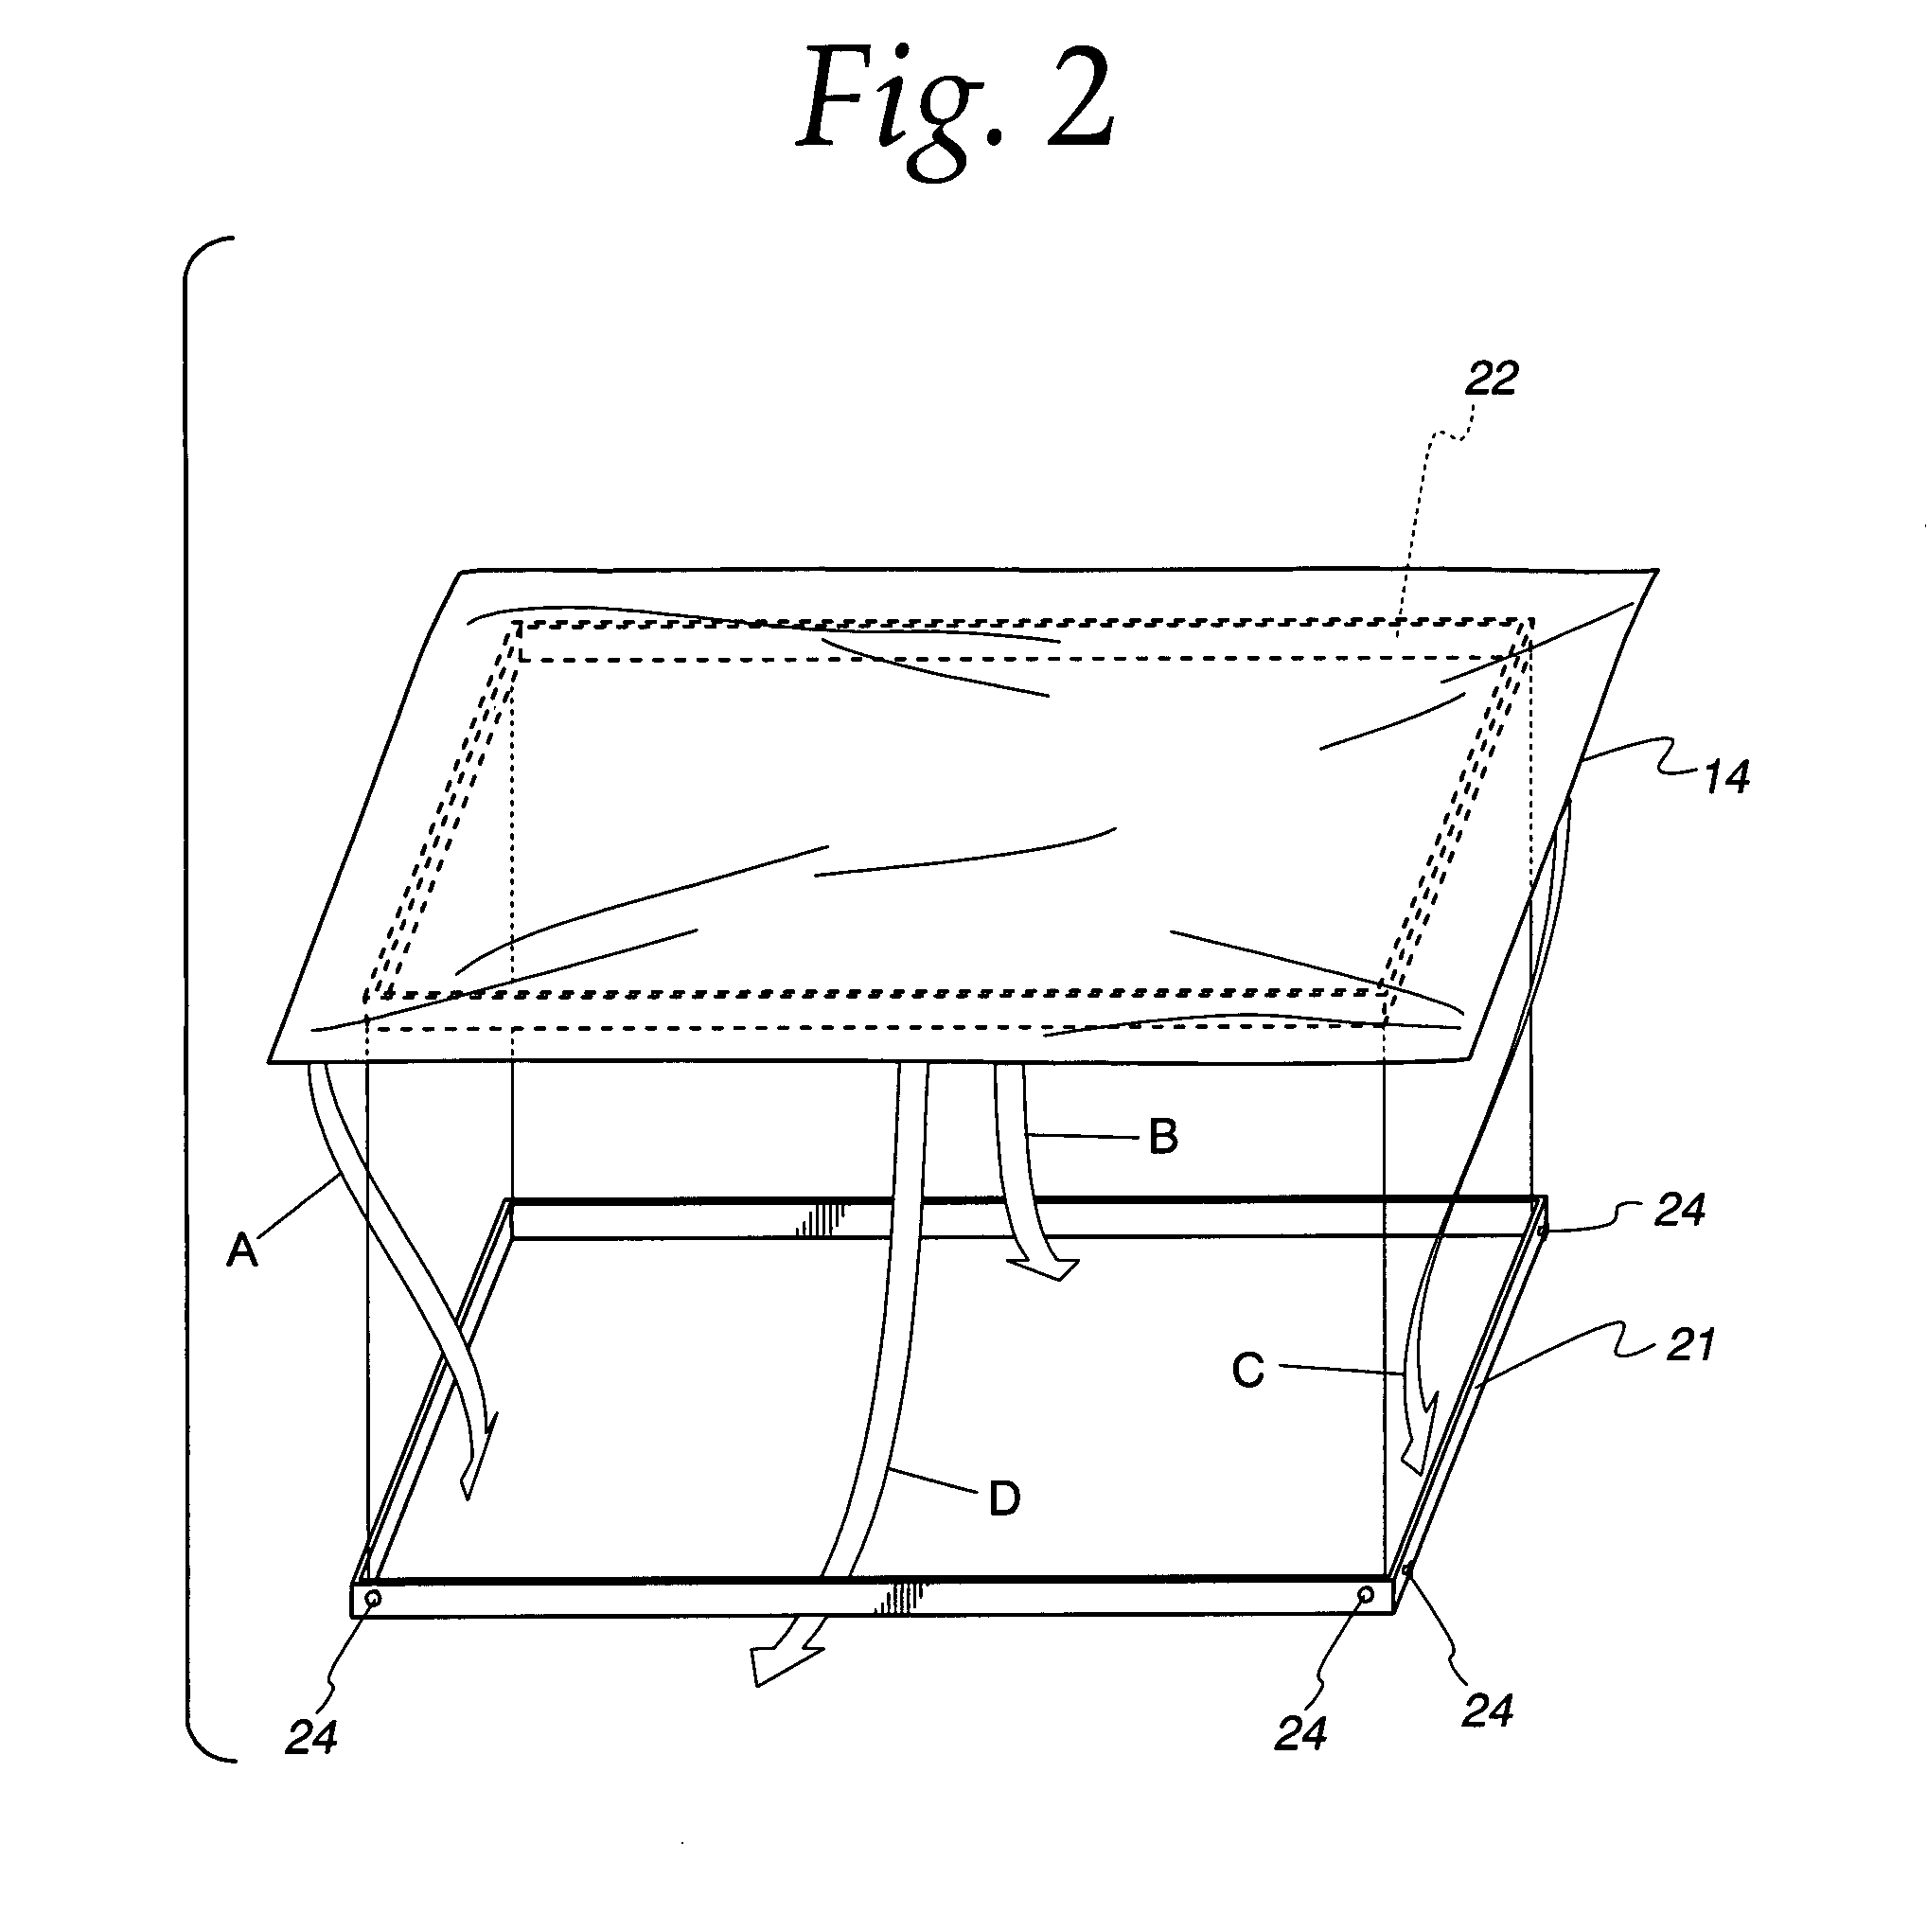 Thin film cooking devices and methods